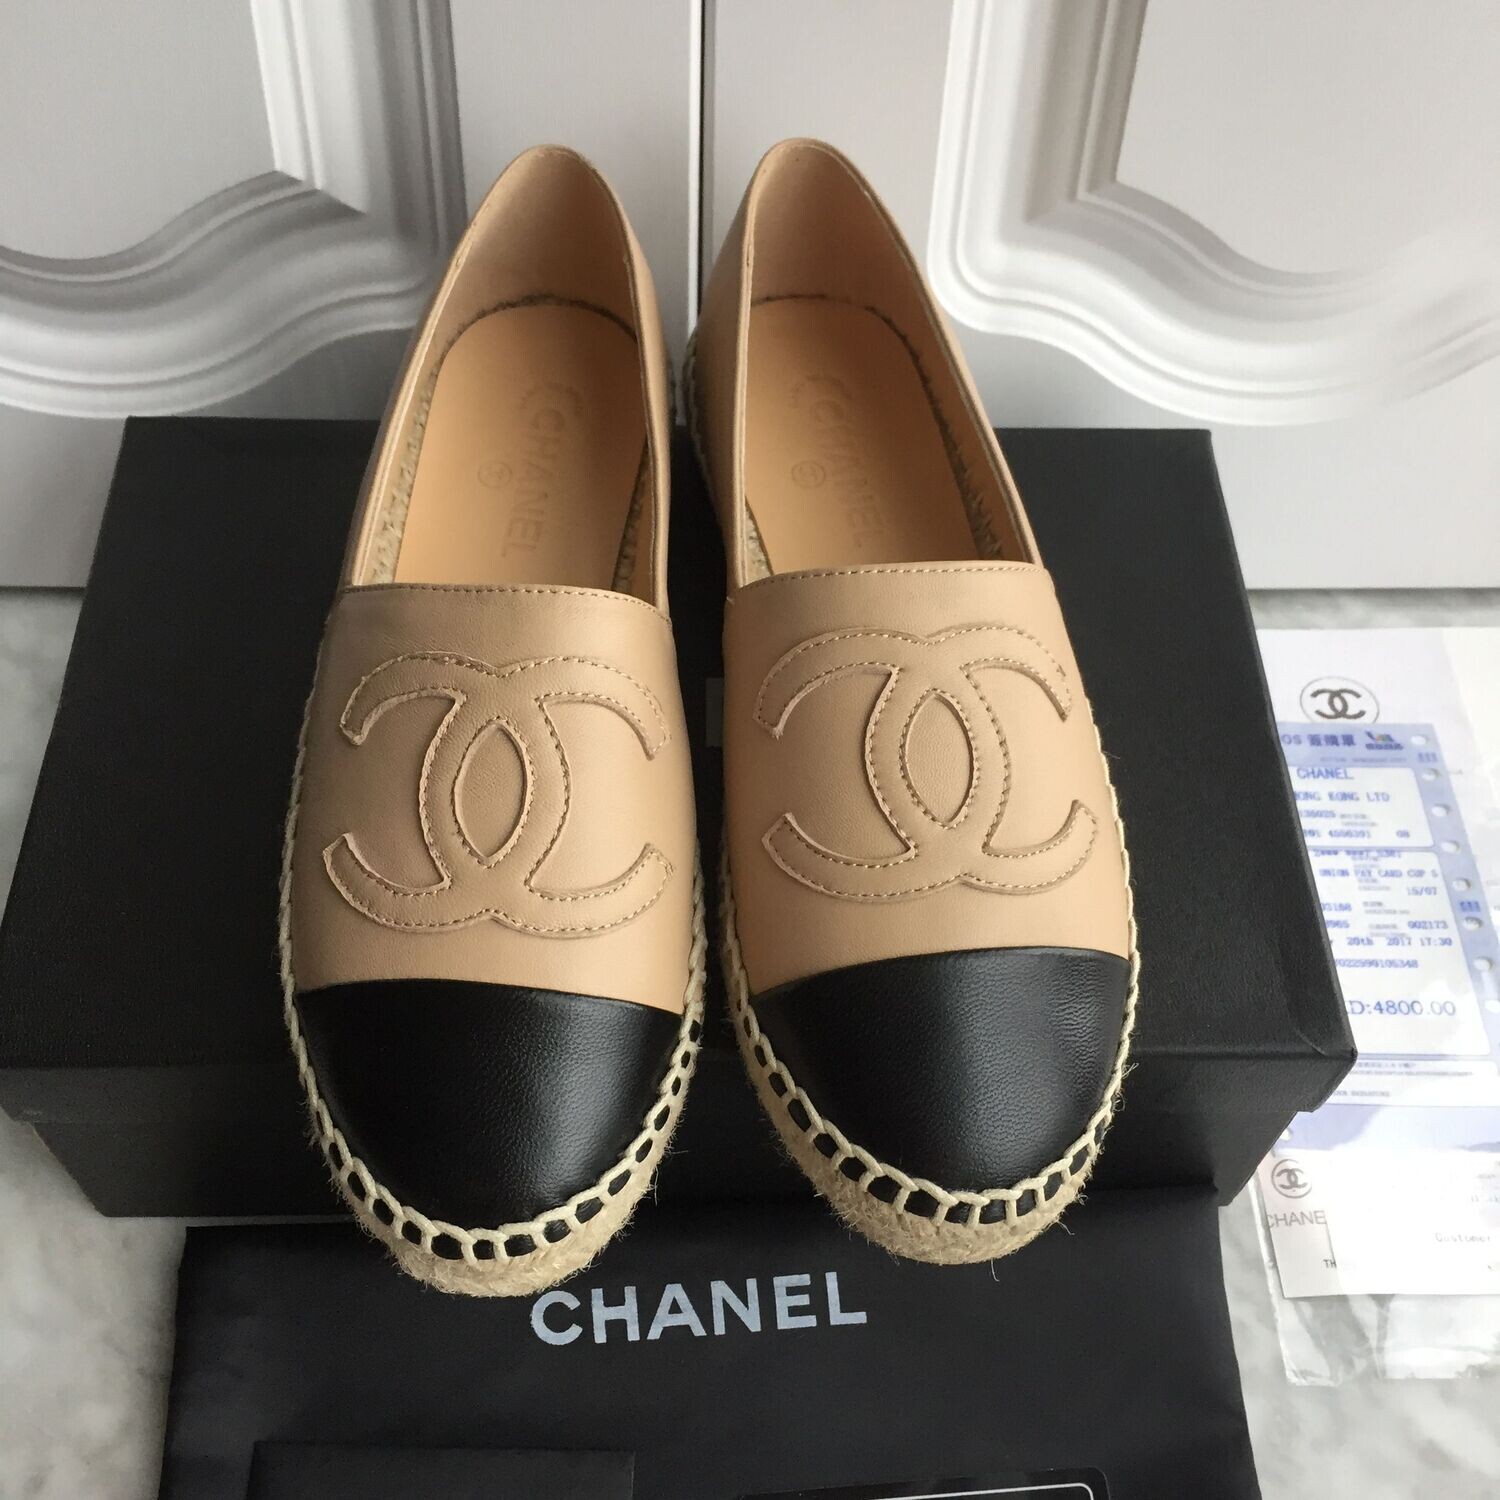 IN STOCK - CC Chanel Espadrille Flat Loafer Size 36 / 6 US